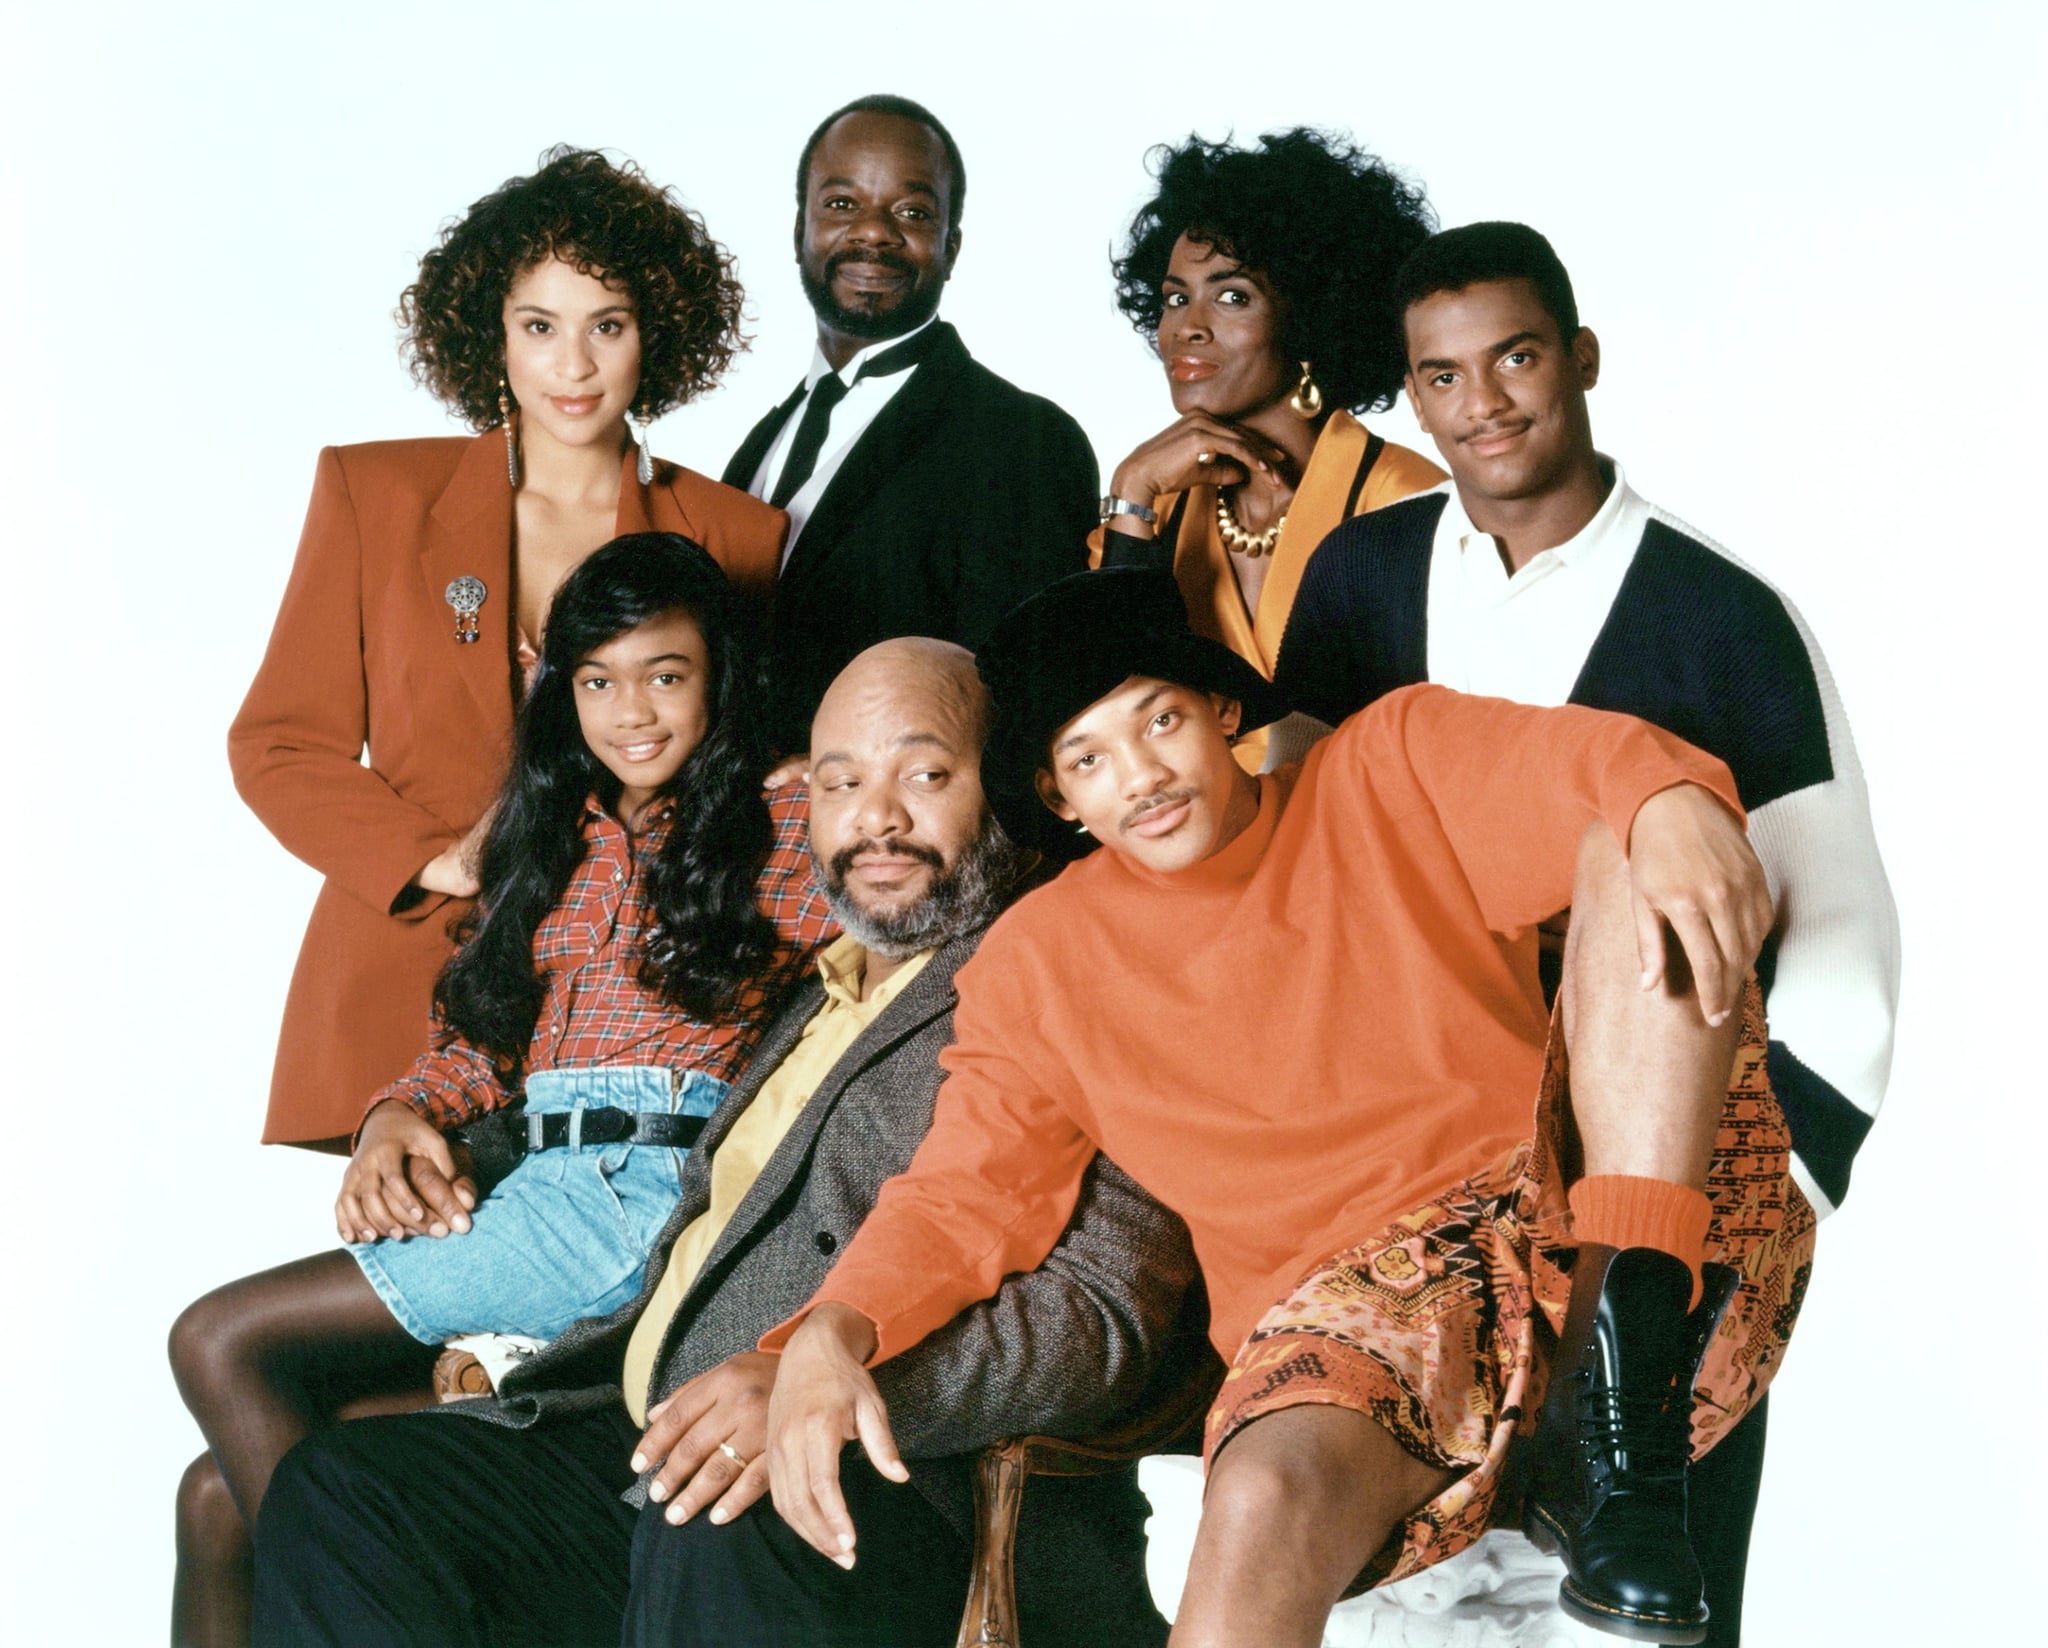 THE FRESH PRINCE OF BEL-AIR, (front, from left): Tatyana Ali, James Avery, Will Smith, (back): Karyn Parsons, Joseph Marcell, Janet Hubert, Alfonso Ribeiro, 1990-96.  NBC / Courtesy: Everett Collection